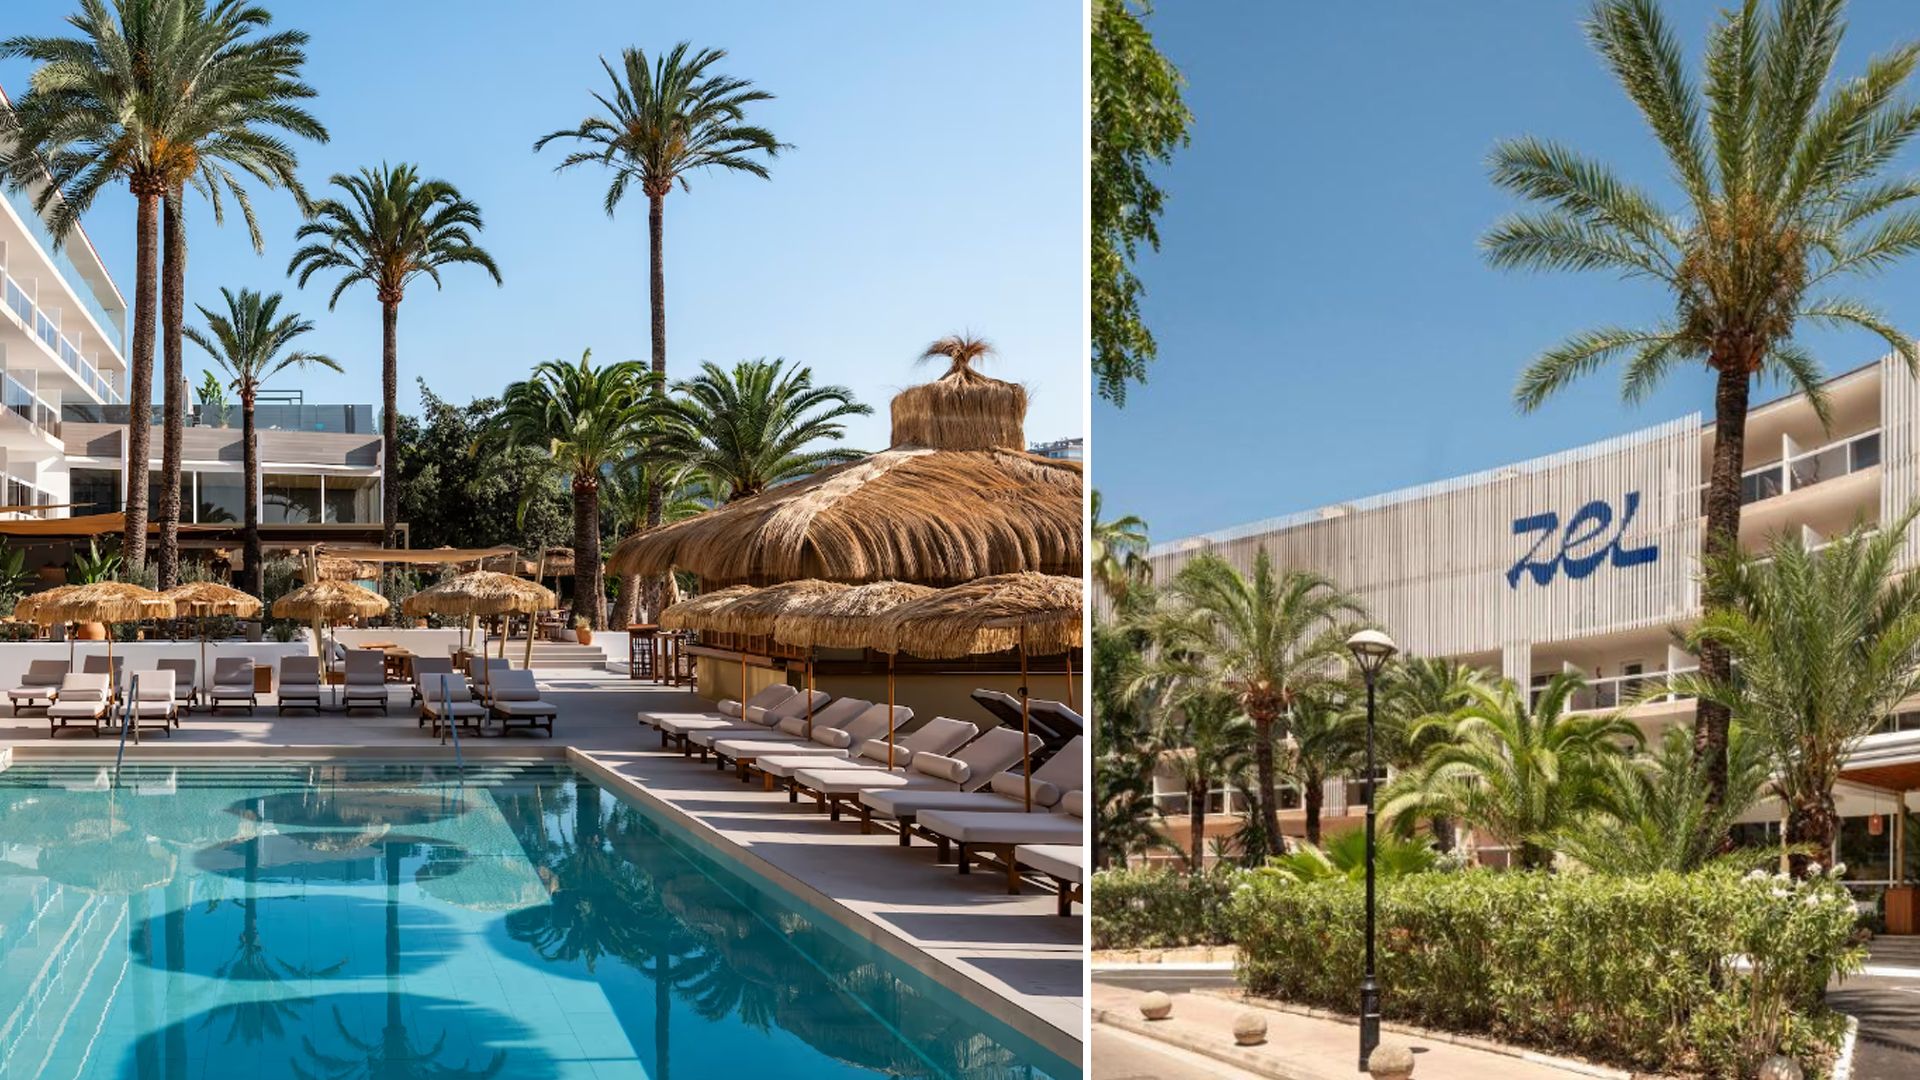 I stayed at ZEL Mallorca for 48 hours: Where to eat, party & explore